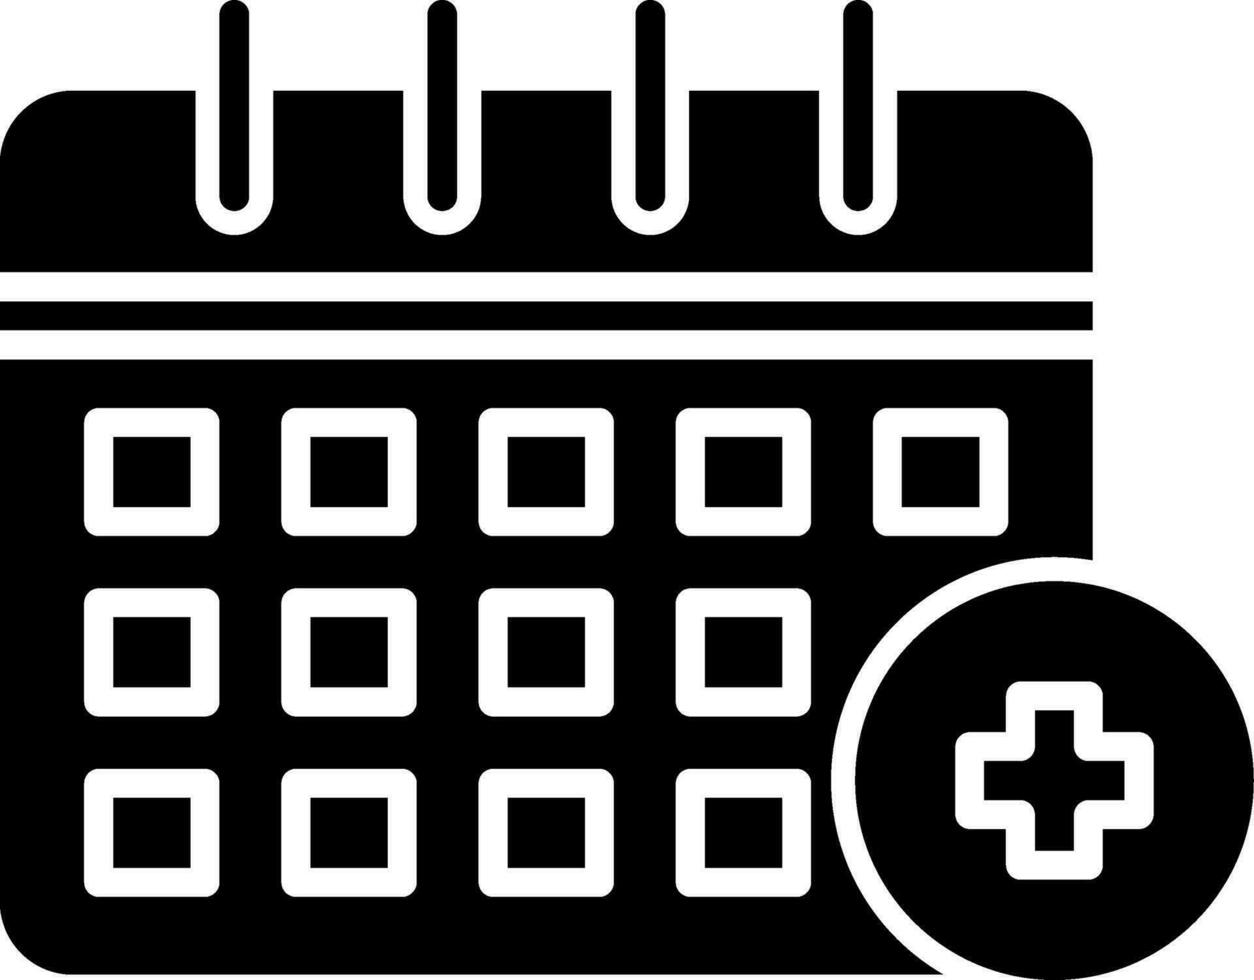 Medical Appointment Vector Icon